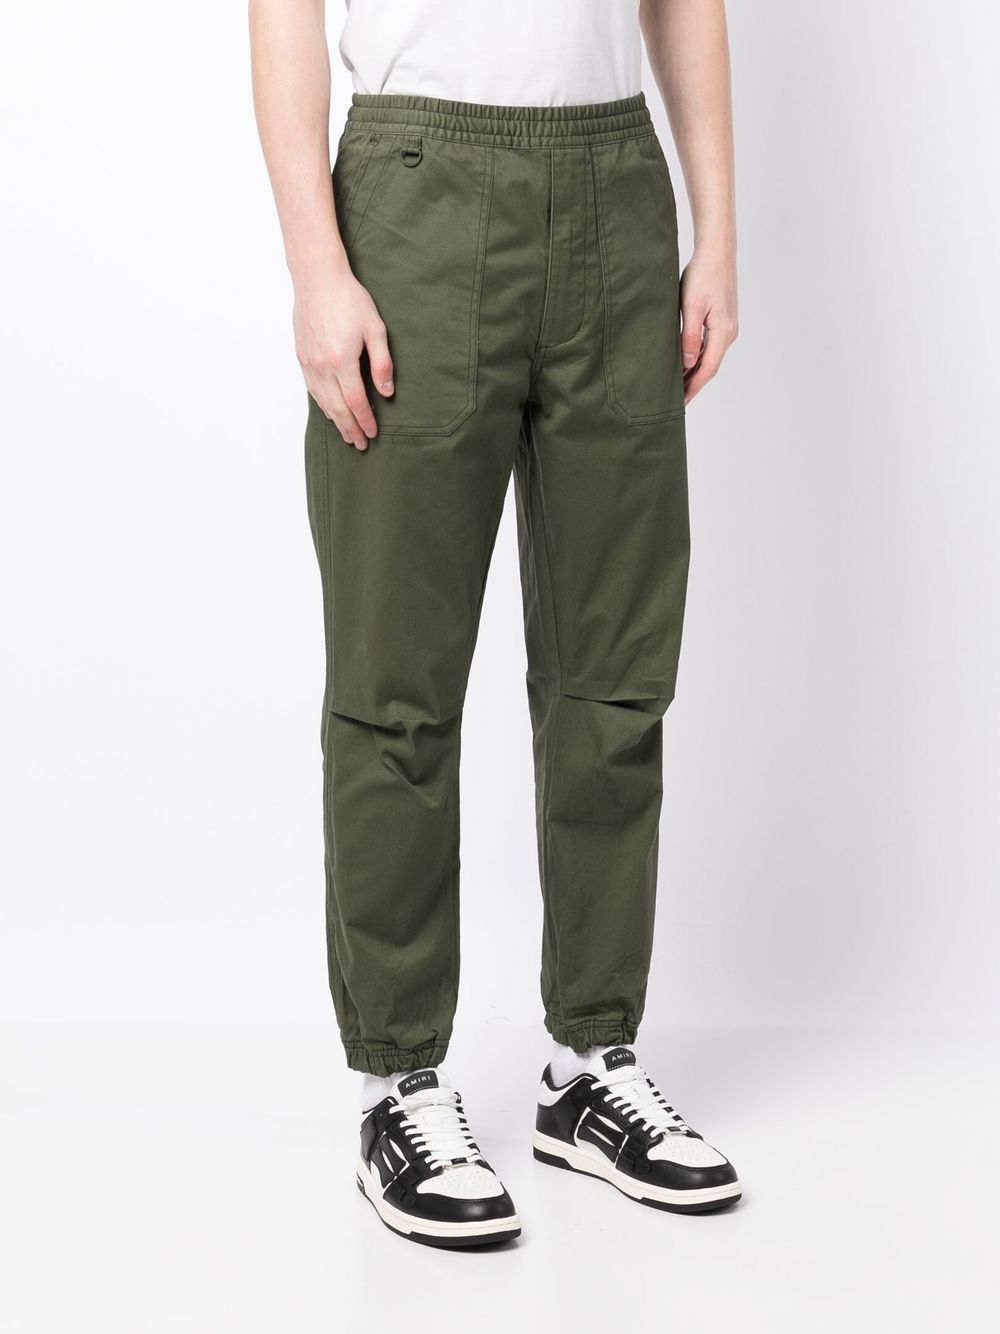 CHOCOOLATE tapered-leg pull-on Trousers - Farfetch